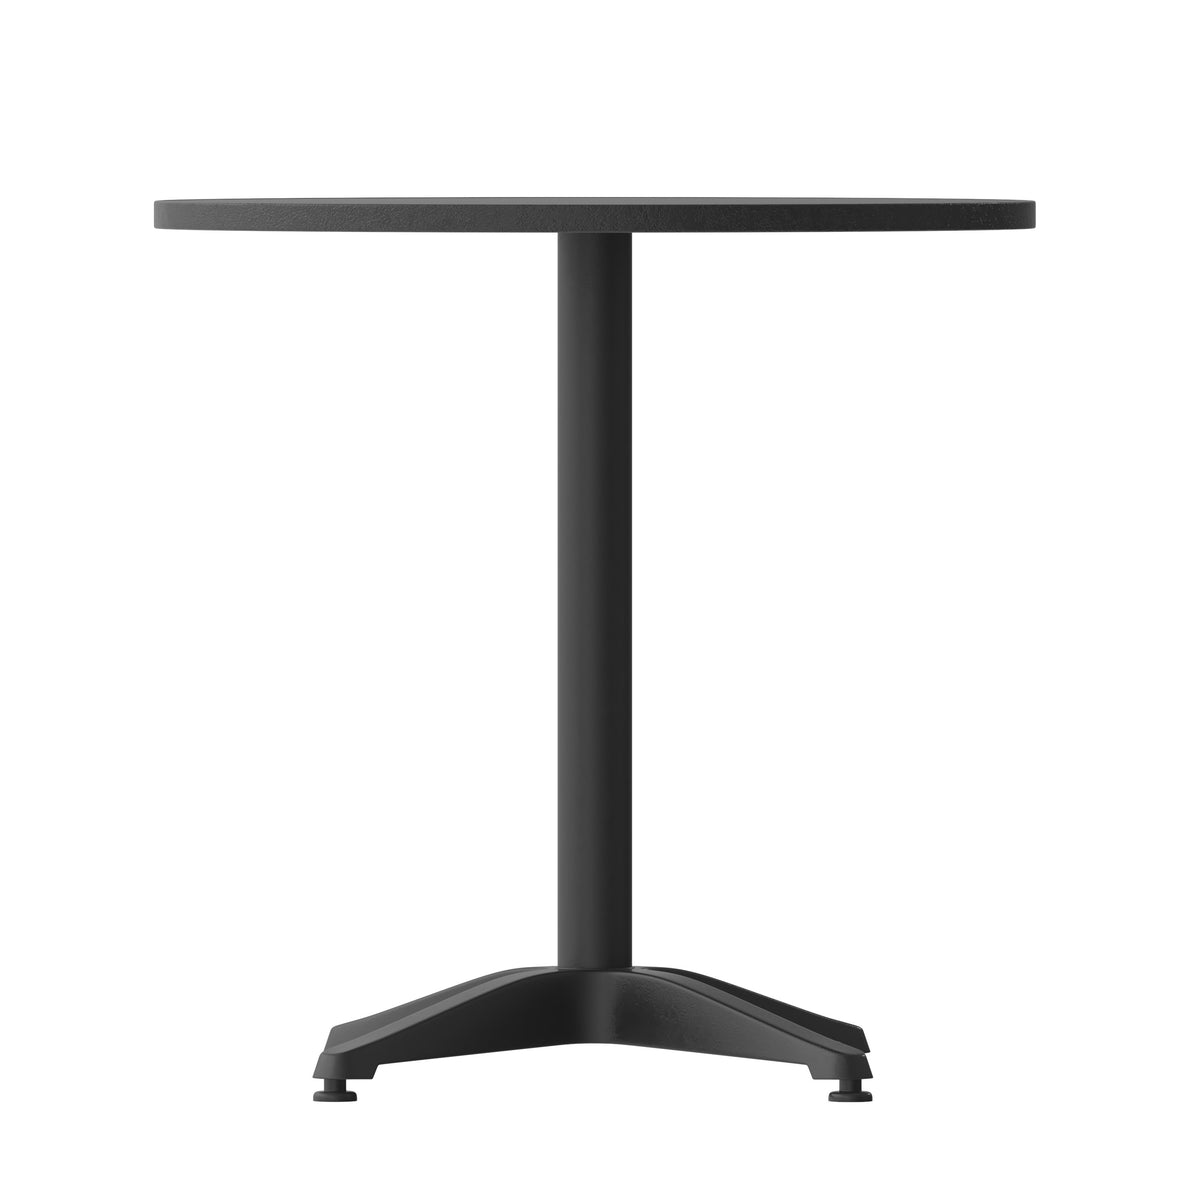 Black |#| 27.5inch Round Metal Smooth Top Indoor-Outdoor Table with Base - Black